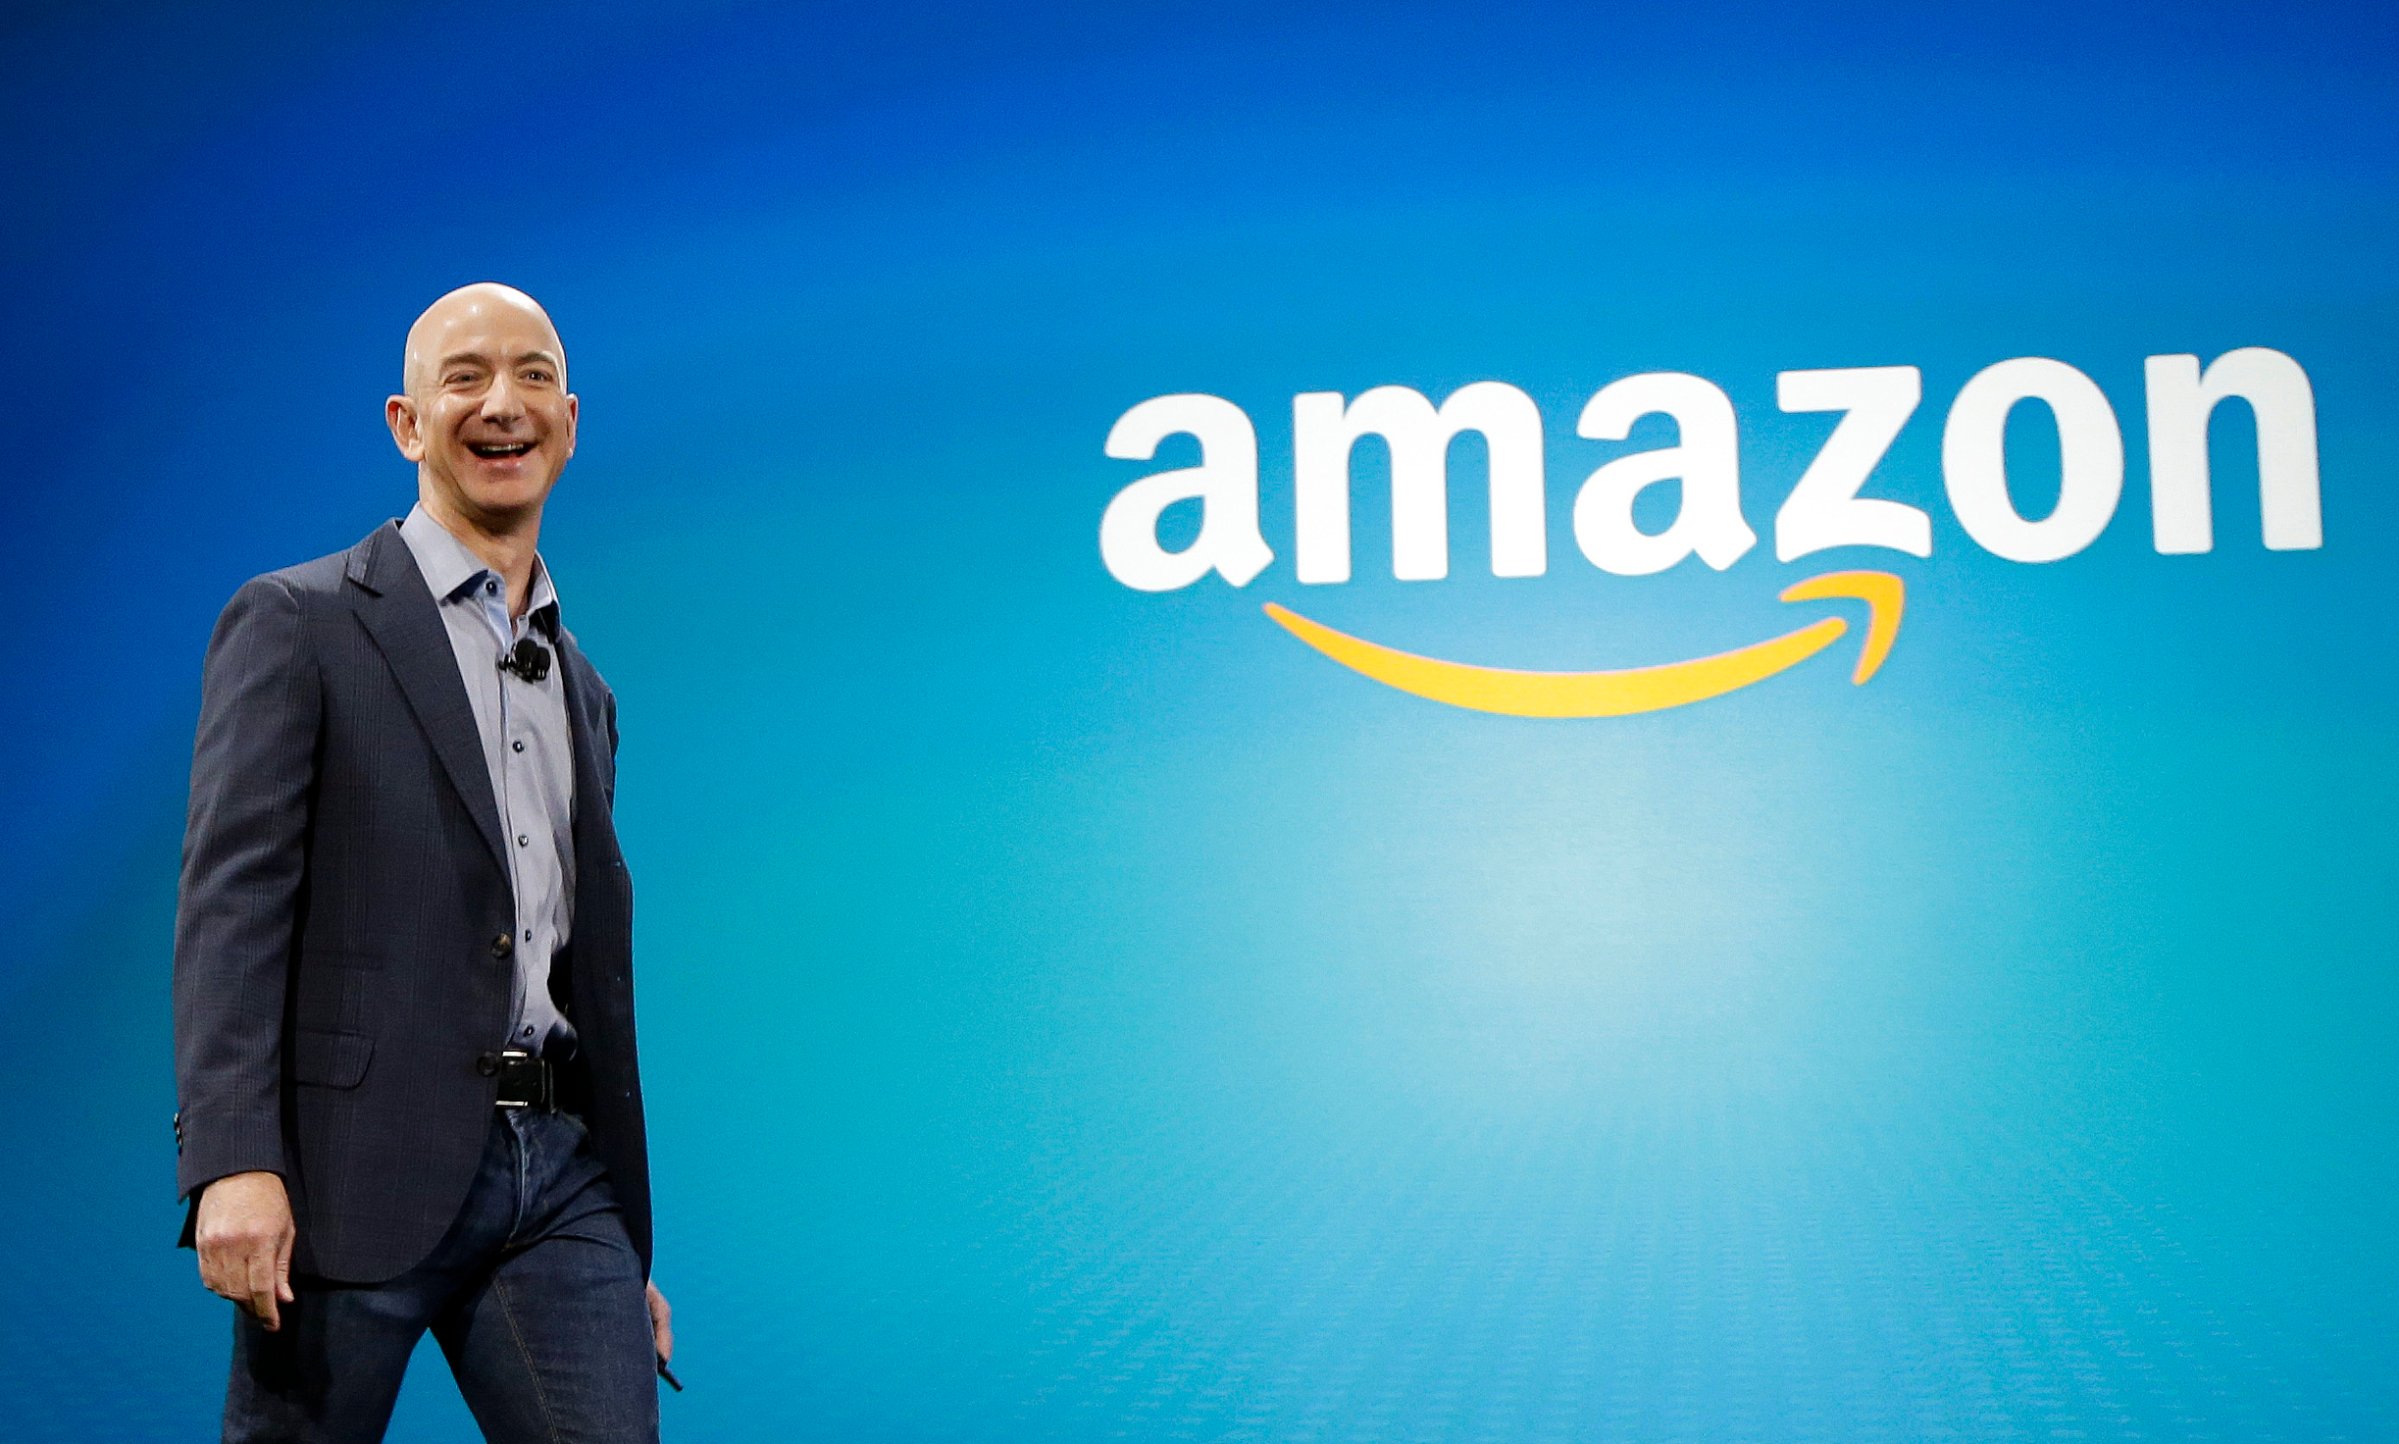 Amazon CEO Jeff Bezos walks onstage for the launch of the new Amazon Fire Phone in Seattle on June 16, 2014.